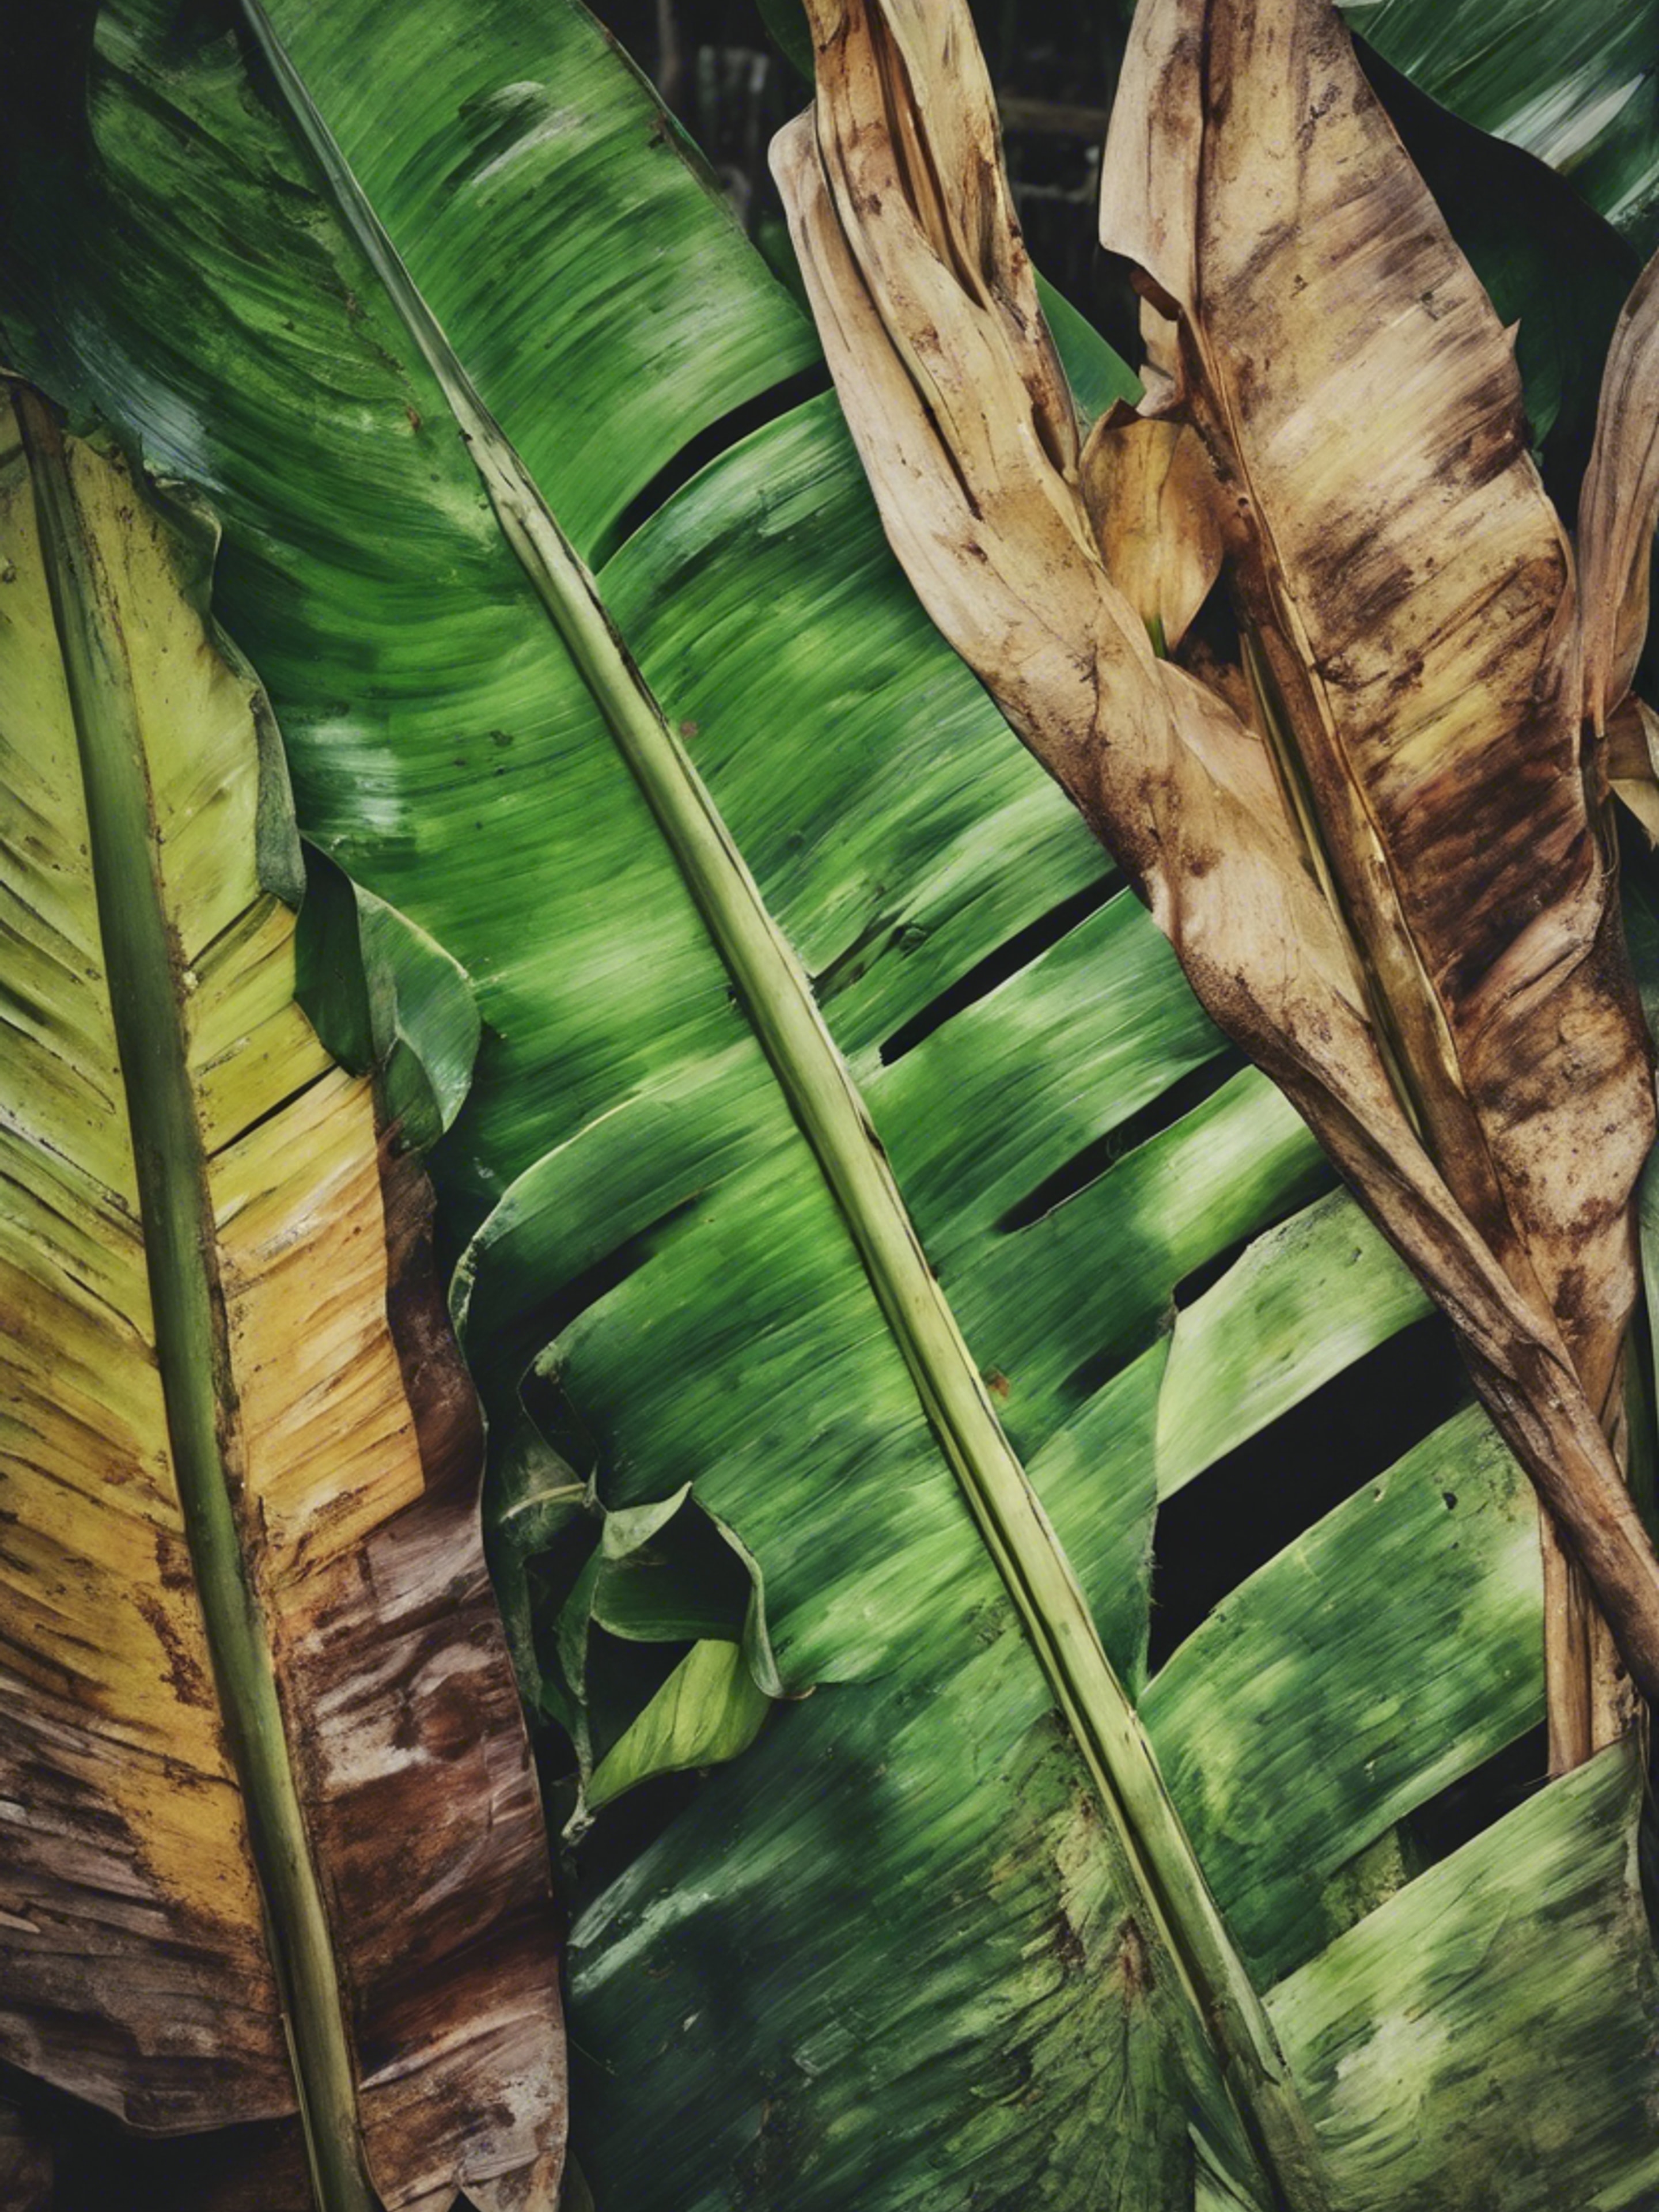 A textured painting of banana leaves in varying stages of life and decay. Tapeta[272dba85425e4d608ad5]